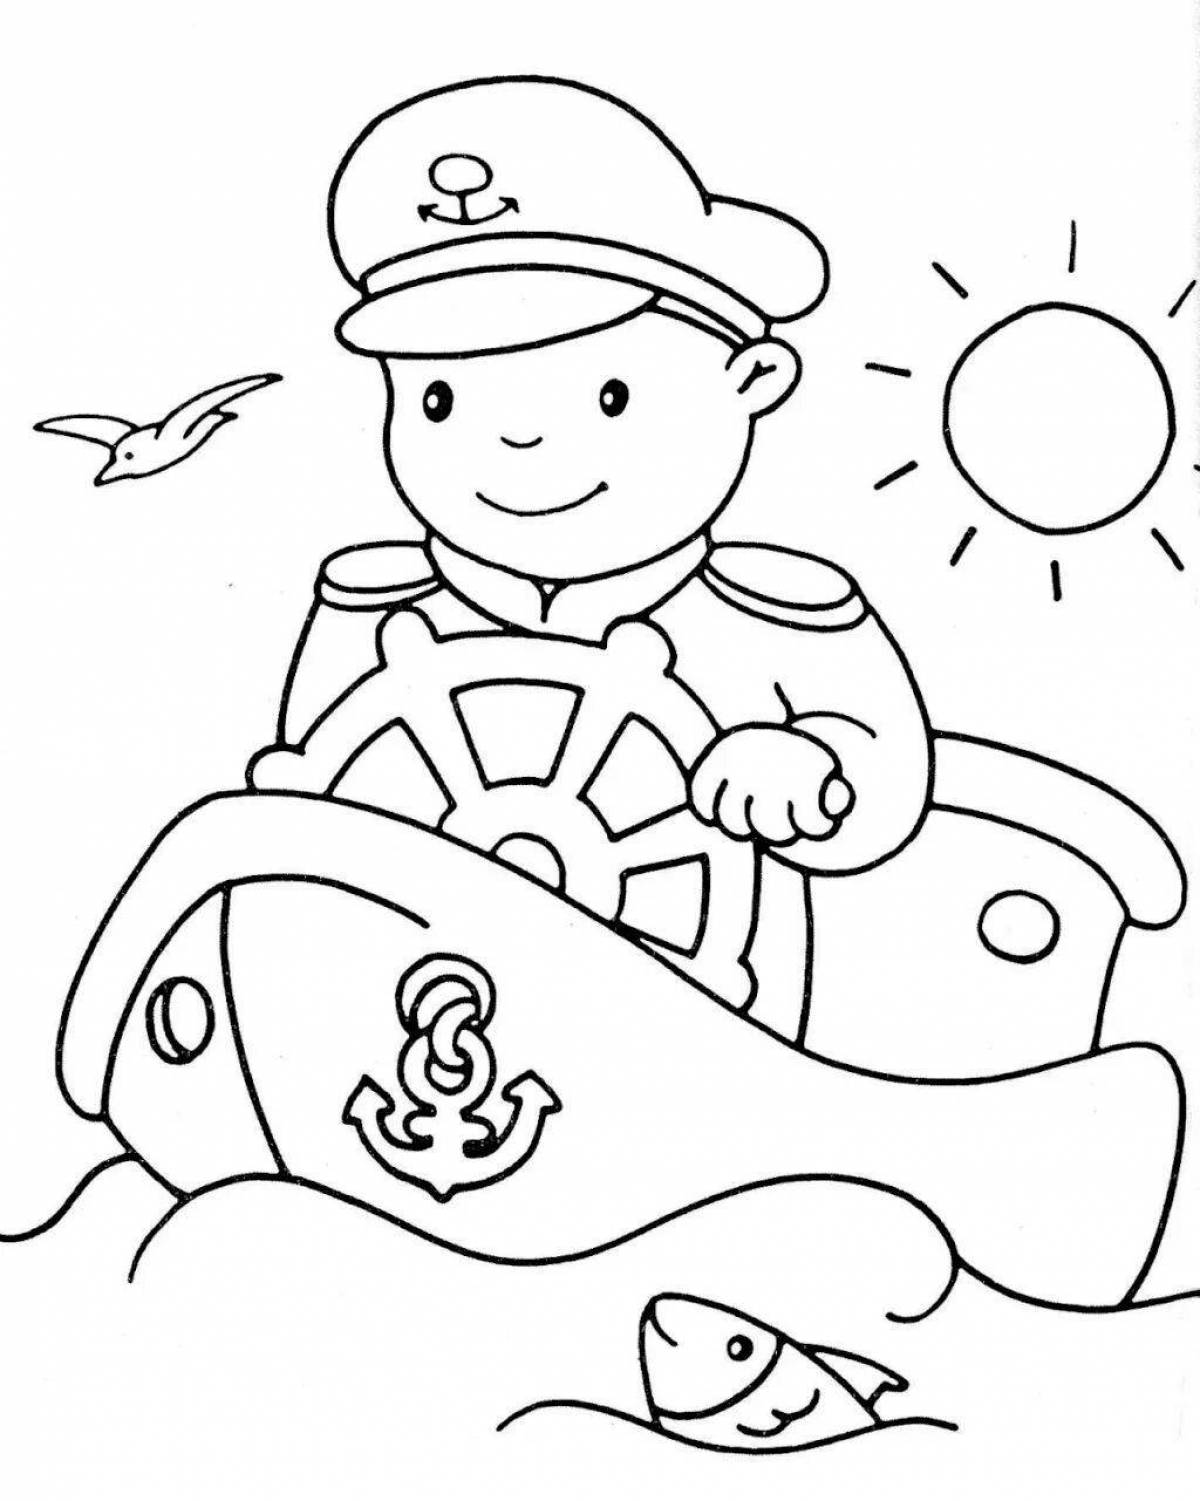 Inspirational military profession coloring book for preschoolers